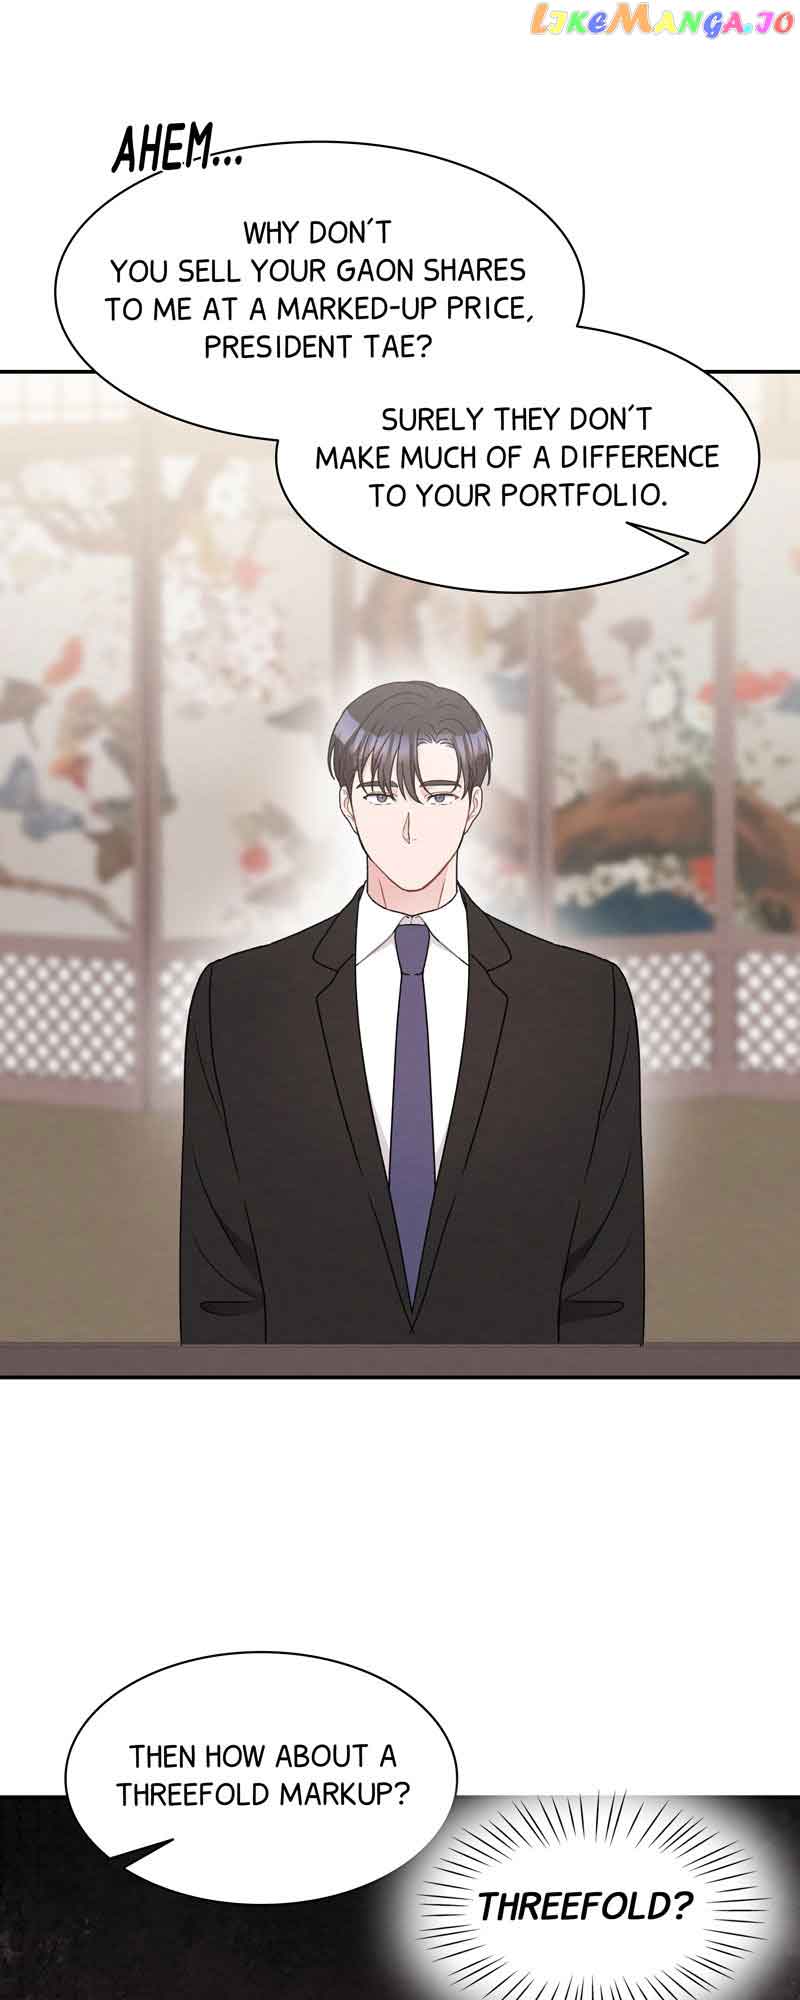 My Bosss’s Perfect Wedding chapter 22